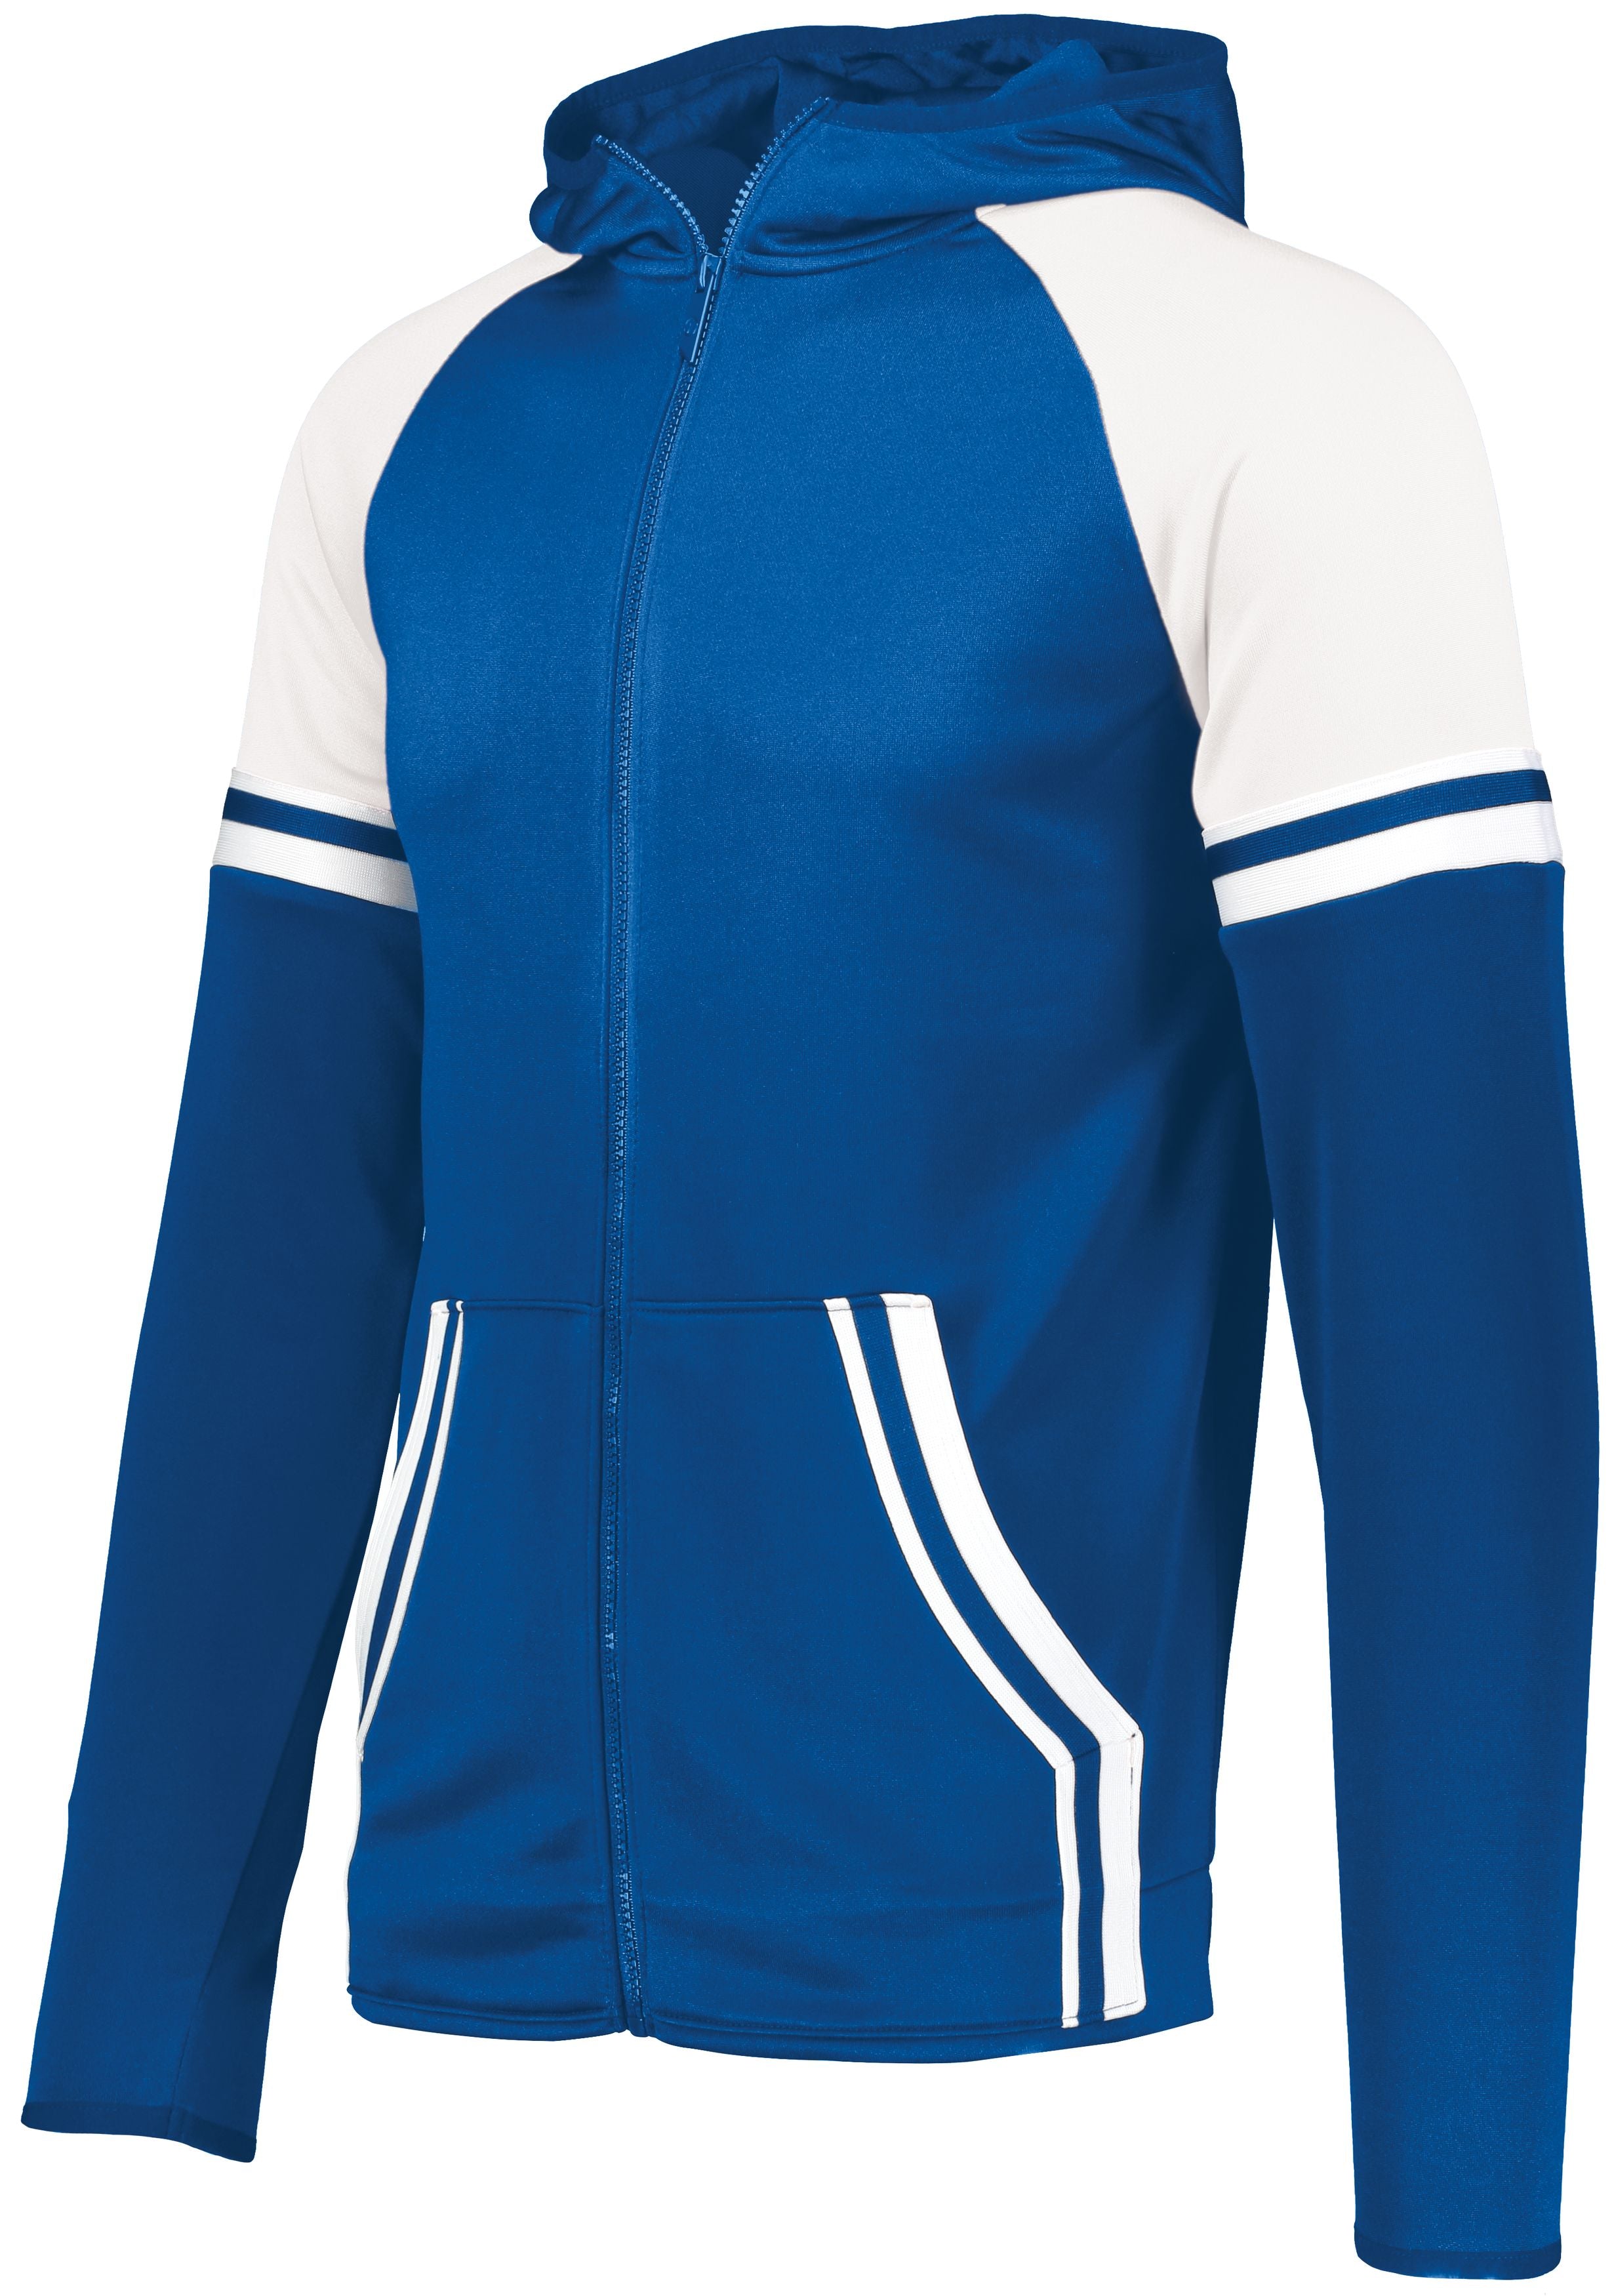 Holloway Retro Grade Jacket in Royal/White  -Part of the Adult, Adult-Jacket, Holloway, Outerwear product lines at KanaleyCreations.com